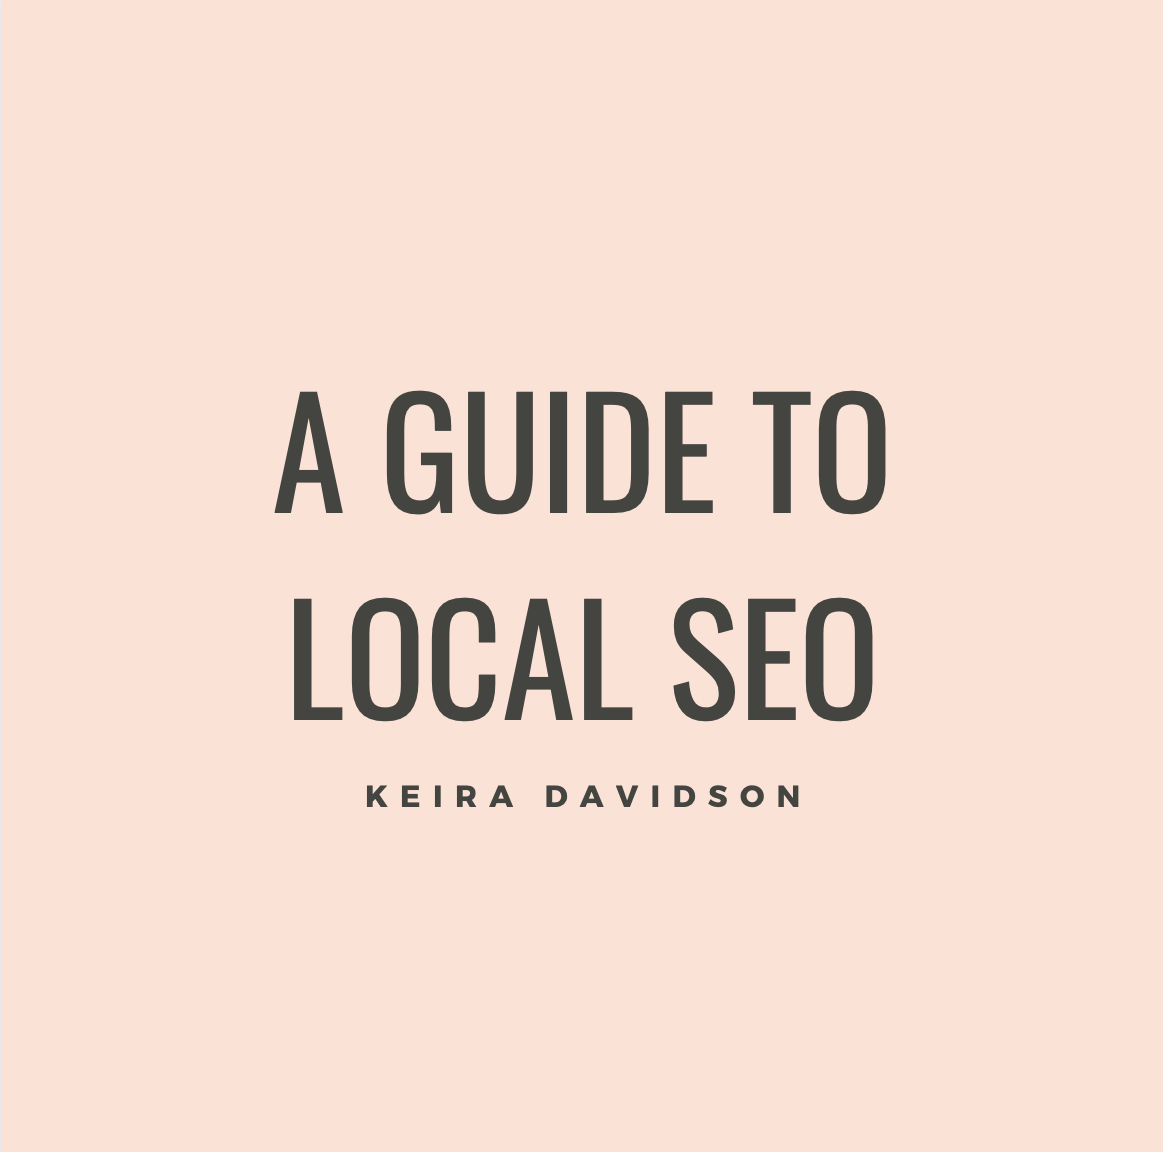 A Guide To Local SEO